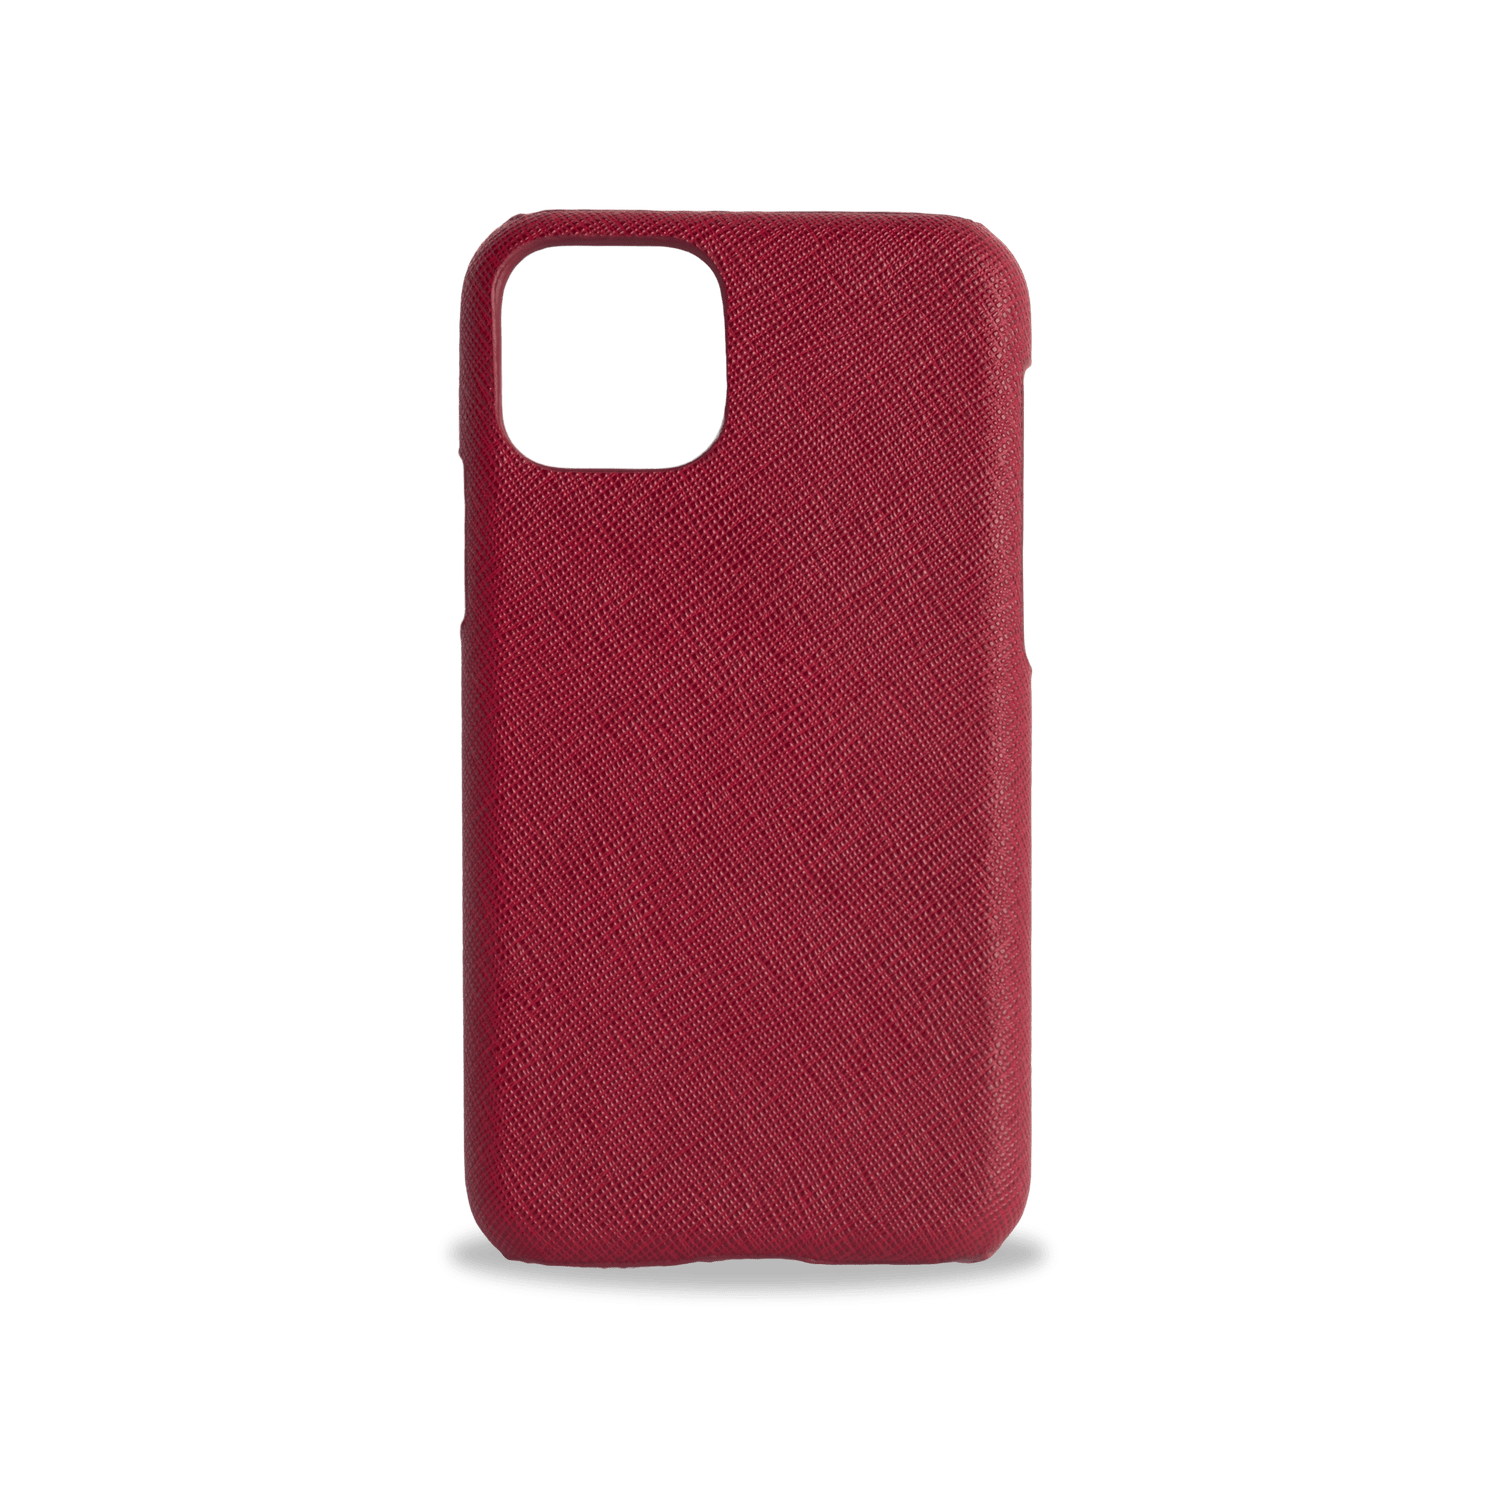 iPhone 11 Pro Case maroon - Personal Press